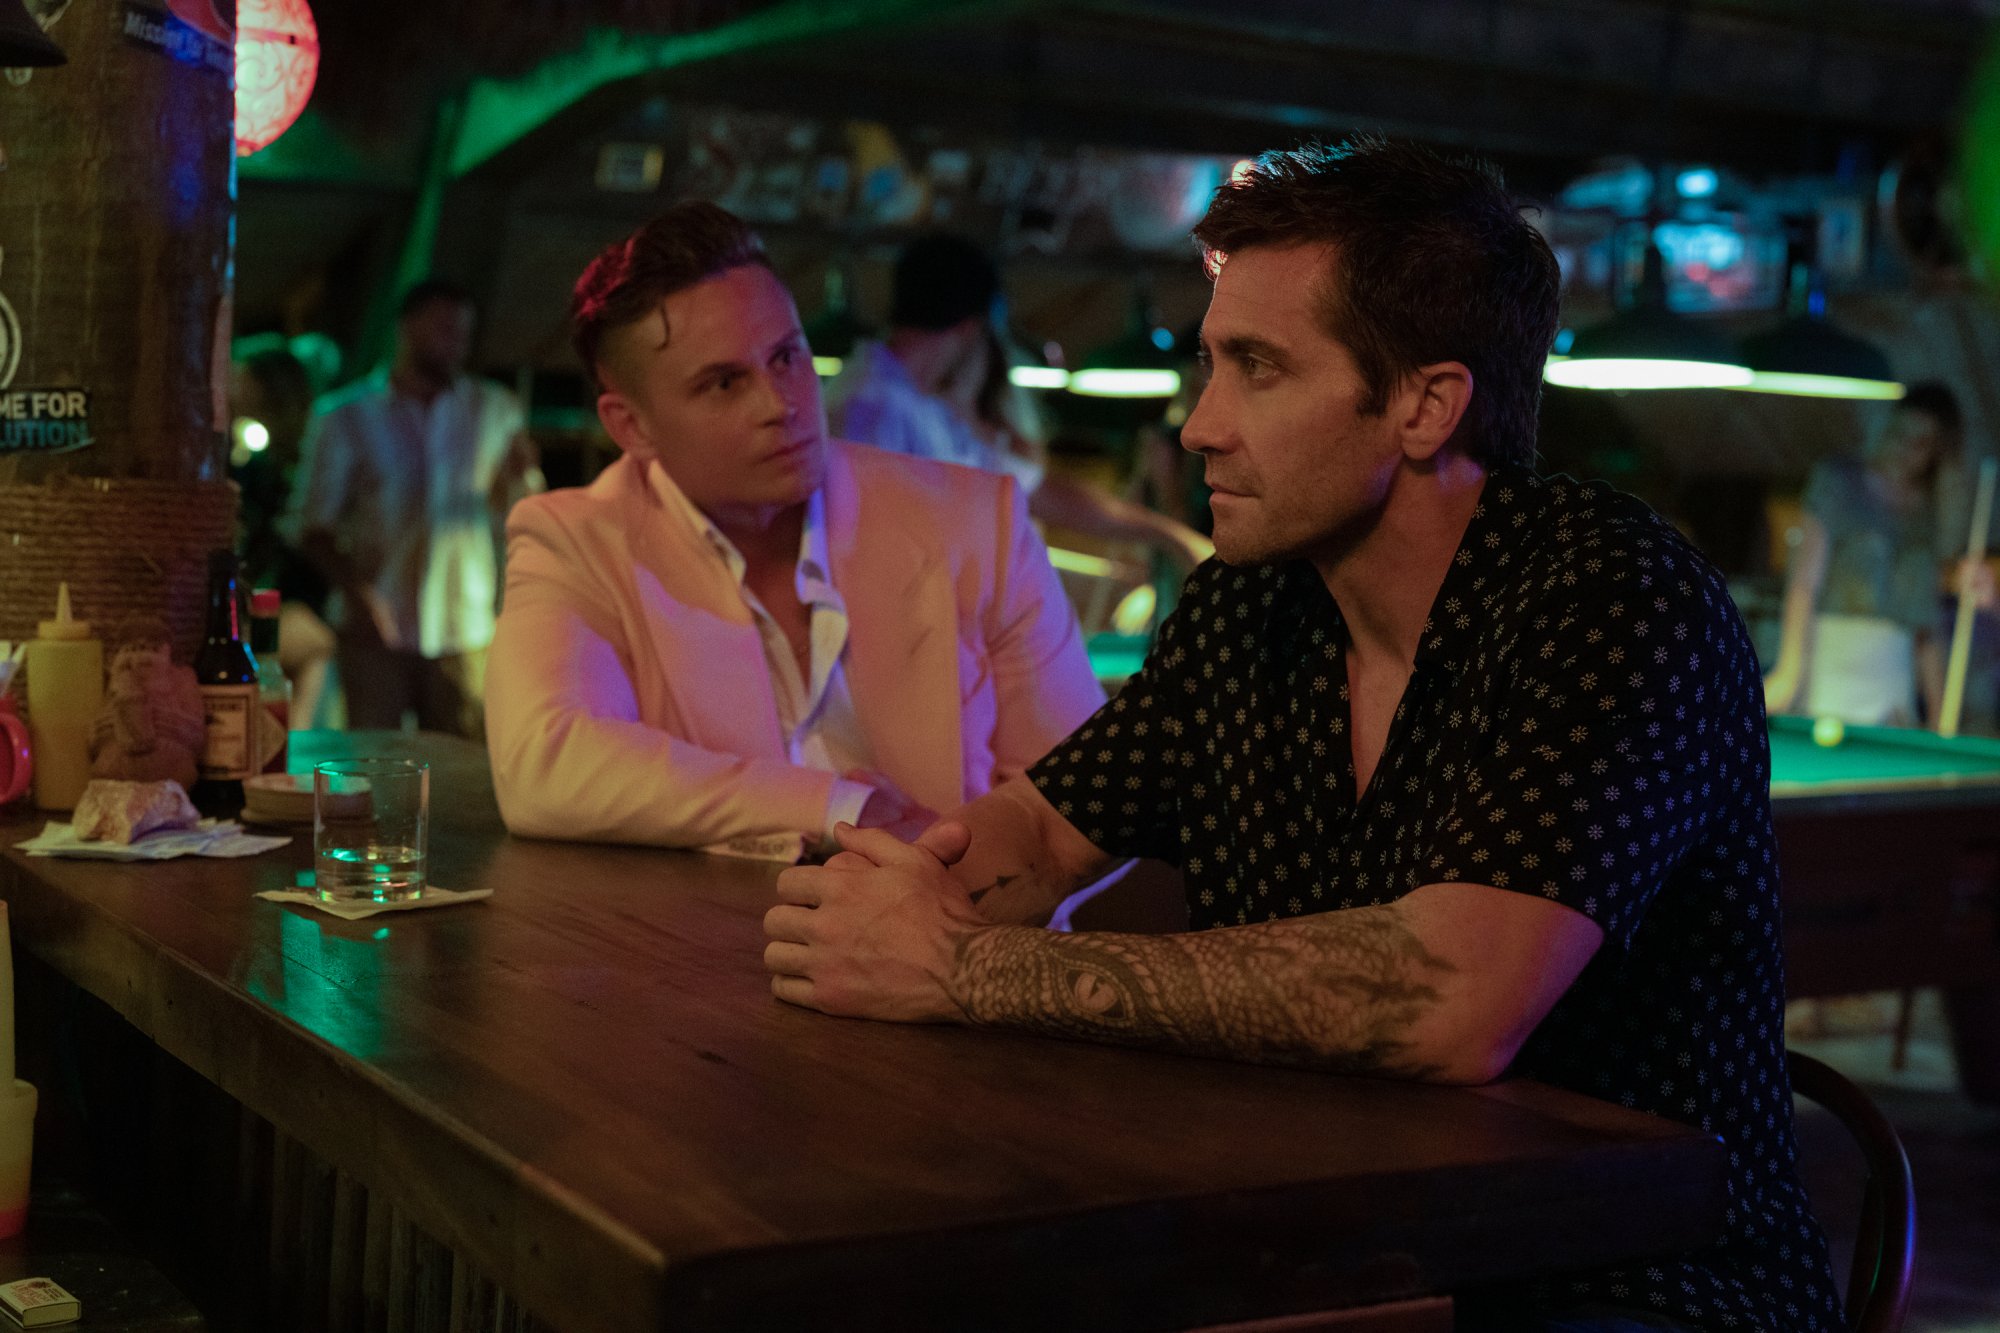 Jake Gyllenhaal and Billy Magnussen in "Road House."